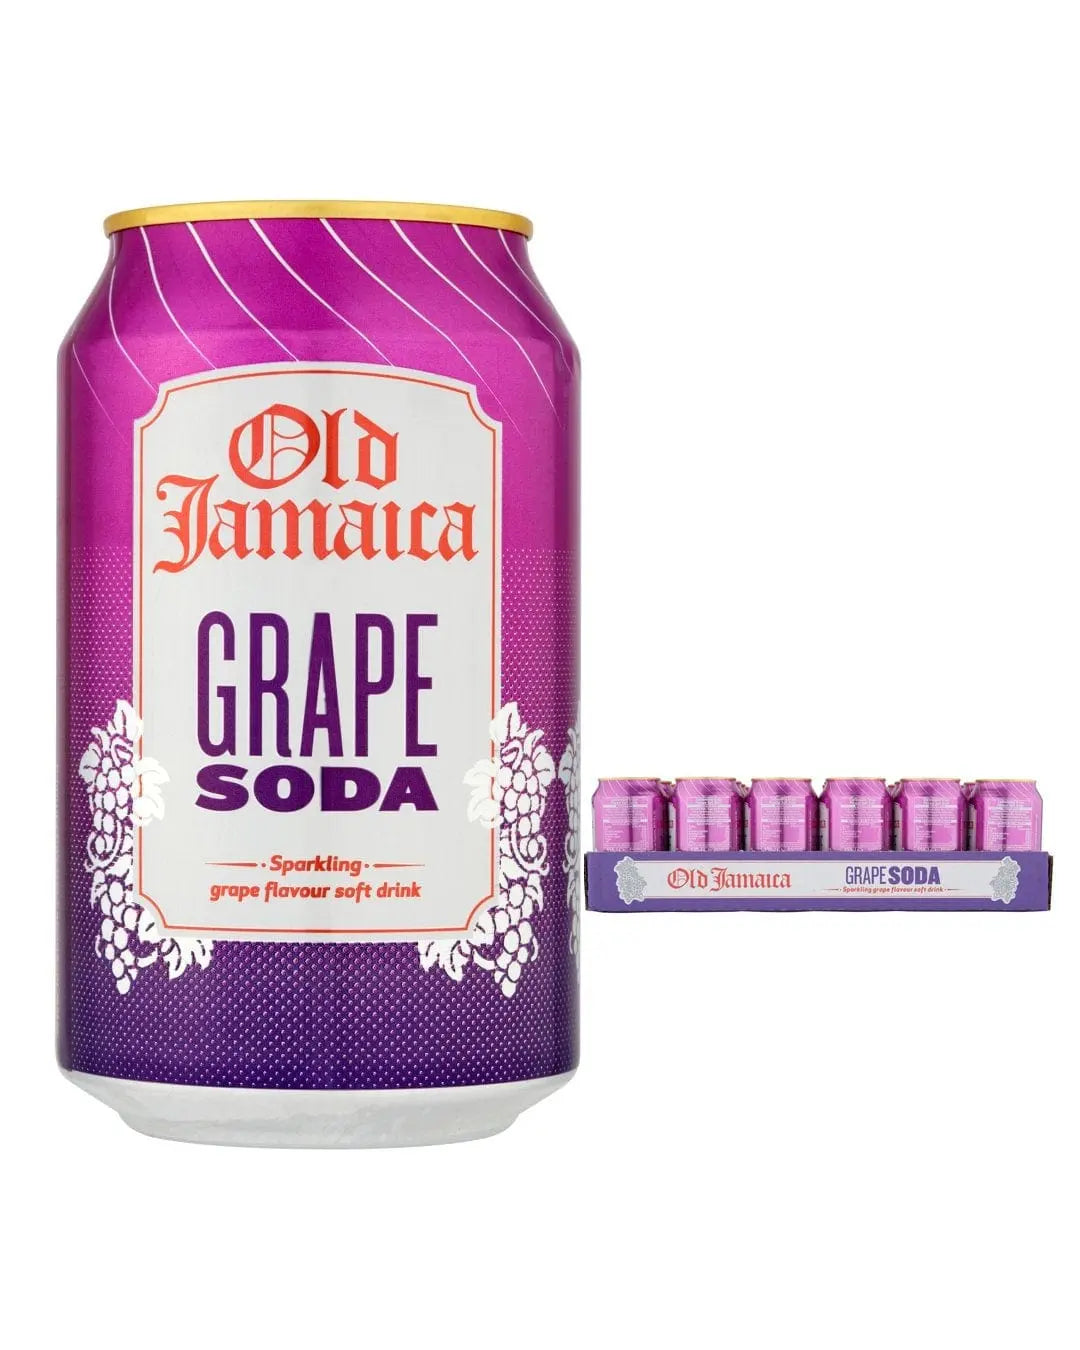 Old Jamaica Sparkling Grape Soda Drink Multipack, 24 x 330 ml Soft Drinks & Mixers